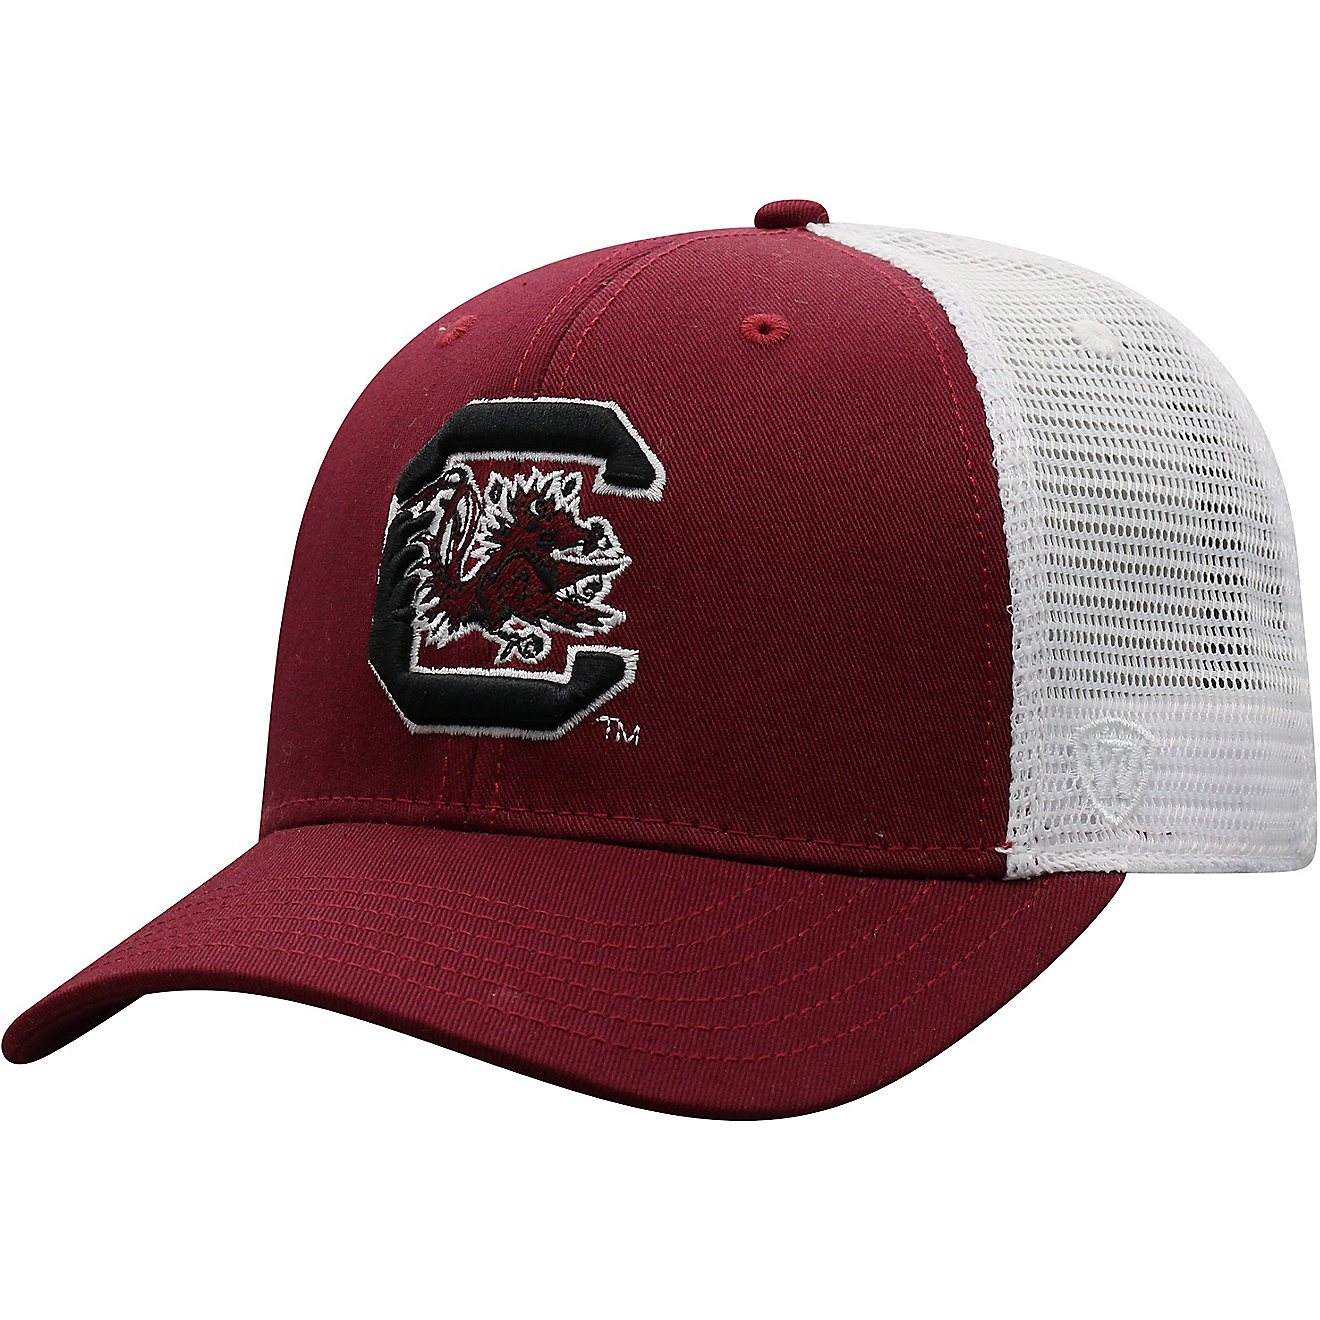 Top of the World Men's University of South Carolina BB 2-Tone Ball Cap                                                           - view number 1